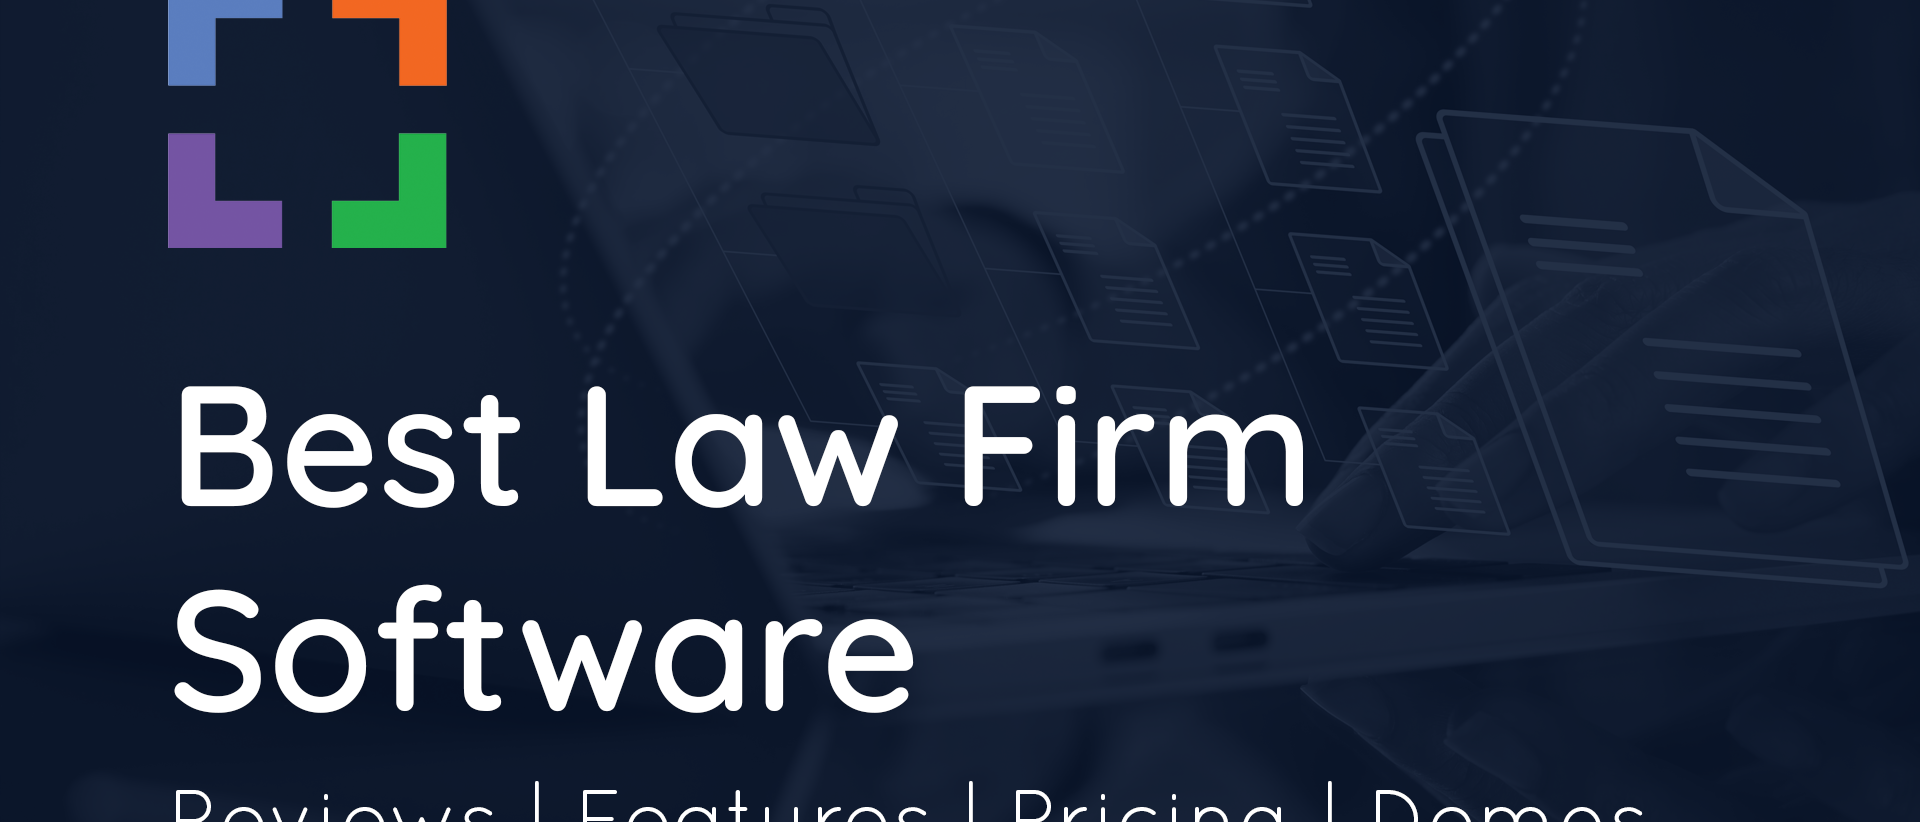 law firm software